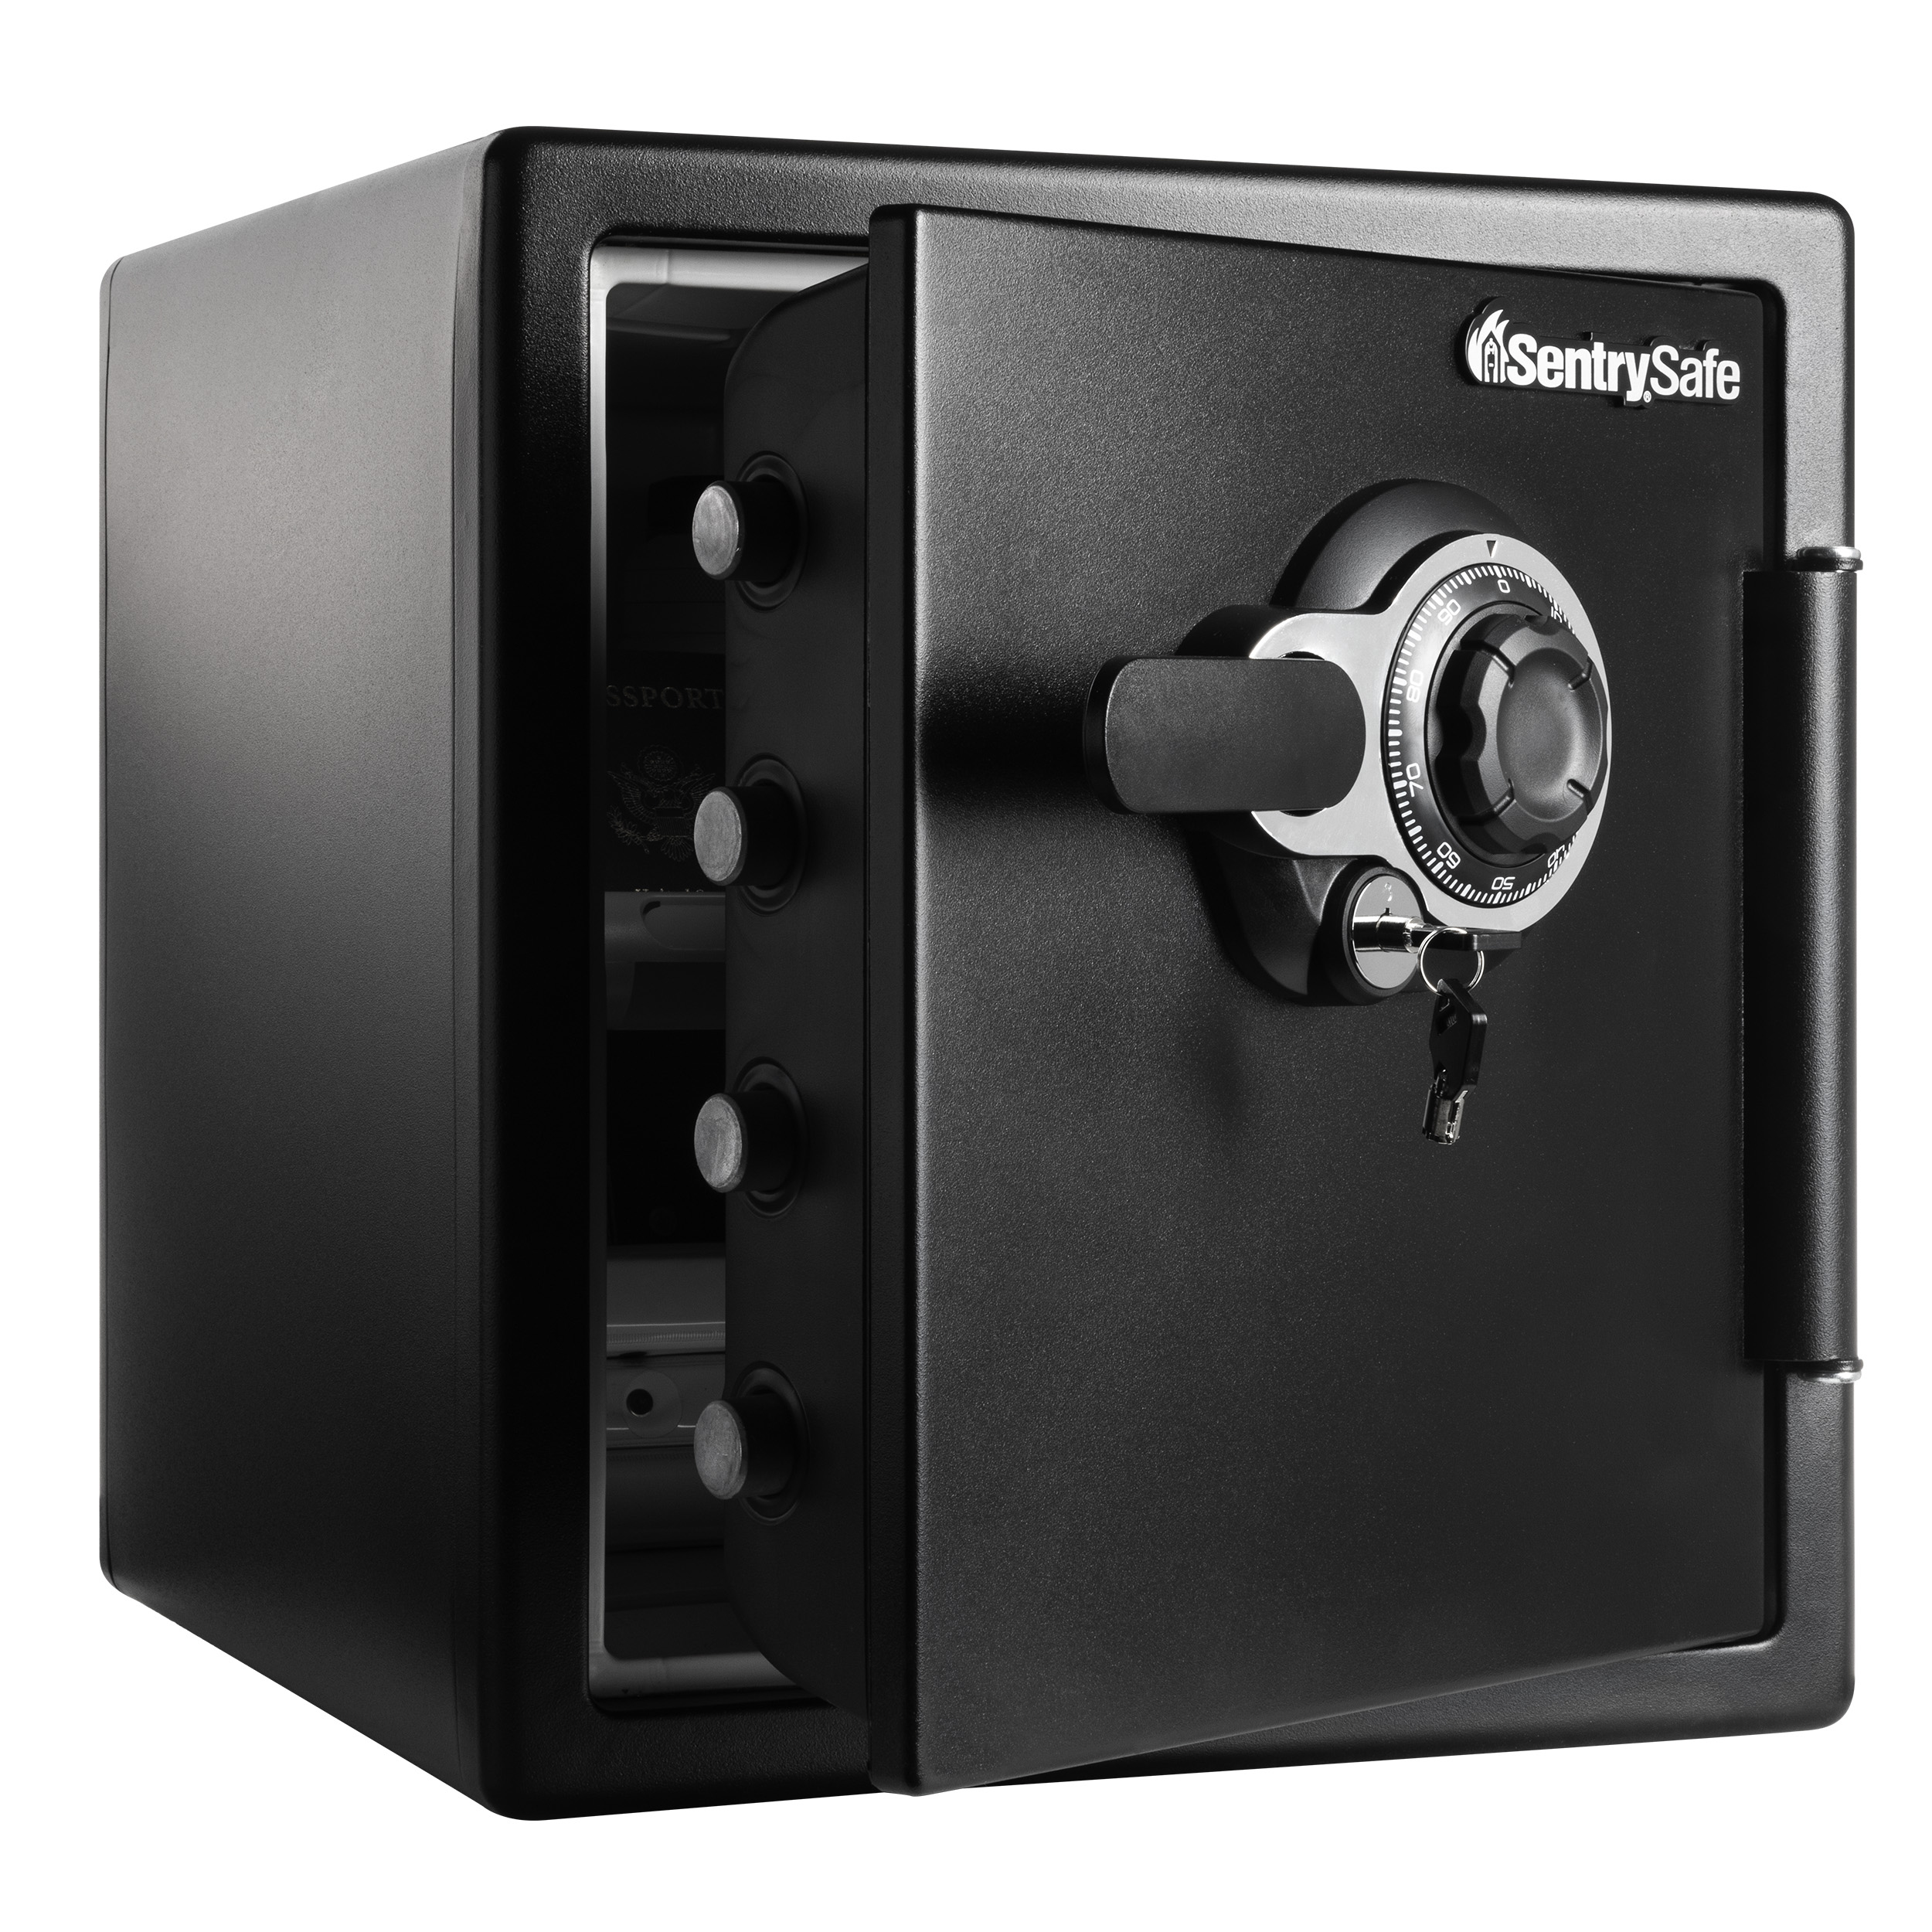 SentrySafe SFW123DTB Fire-Resistant and Water-Resistant Safe with Combination Lock, 1.23 cu. ft. - image 1 of 8